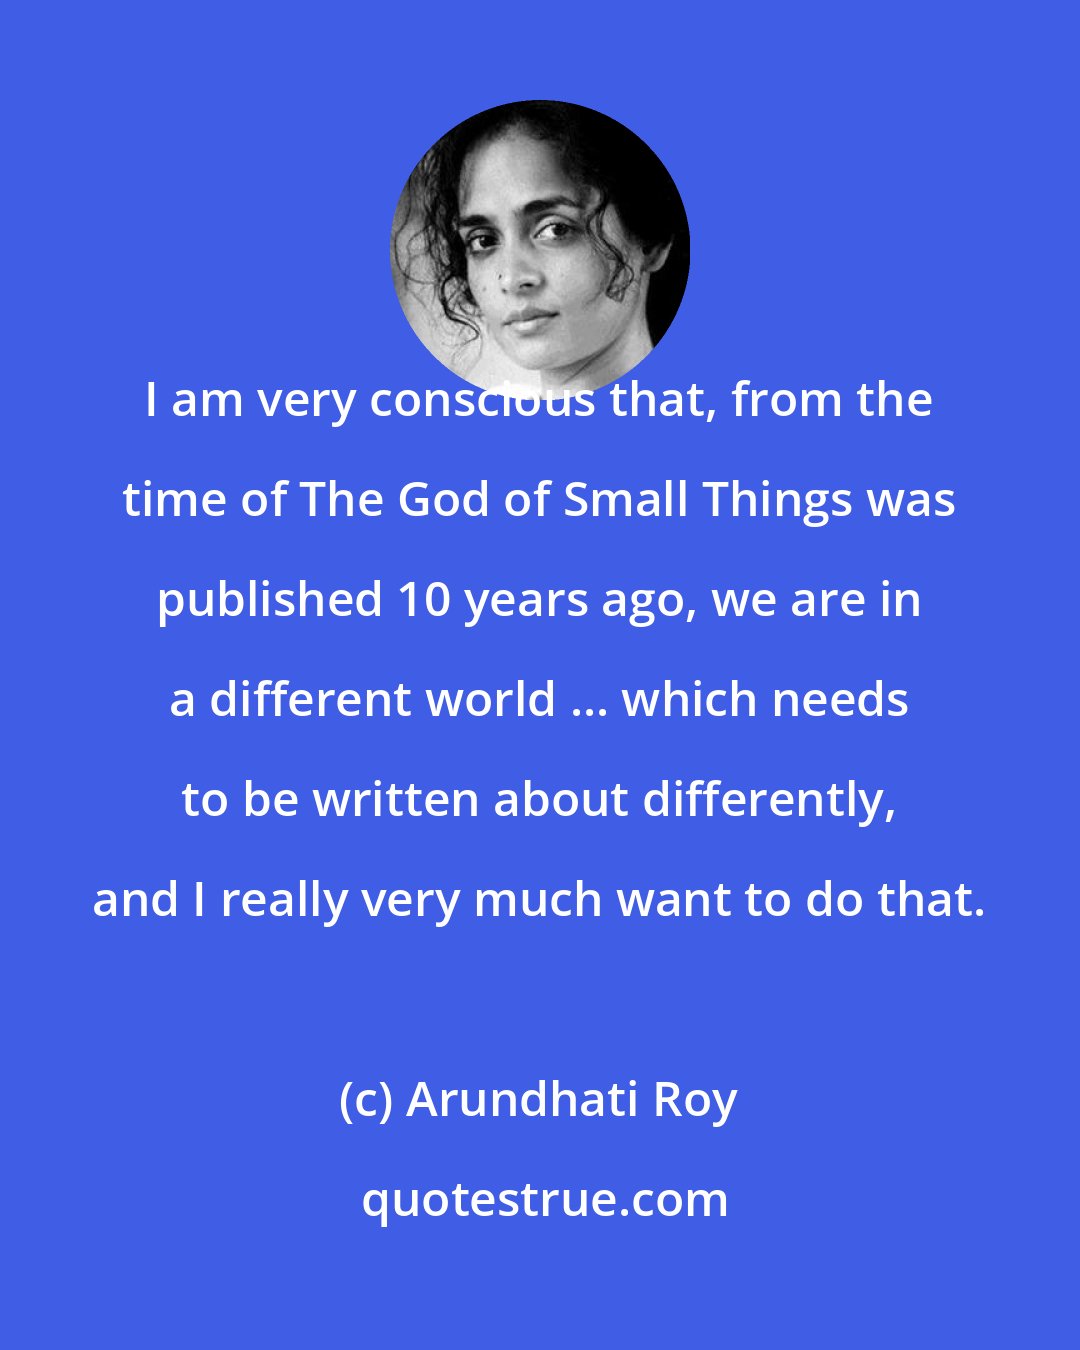 Arundhati Roy: I am very conscious that, from the time of The God of Small Things was published 10 years ago, we are in a different world ... which needs to be written about differently, and I really very much want to do that.